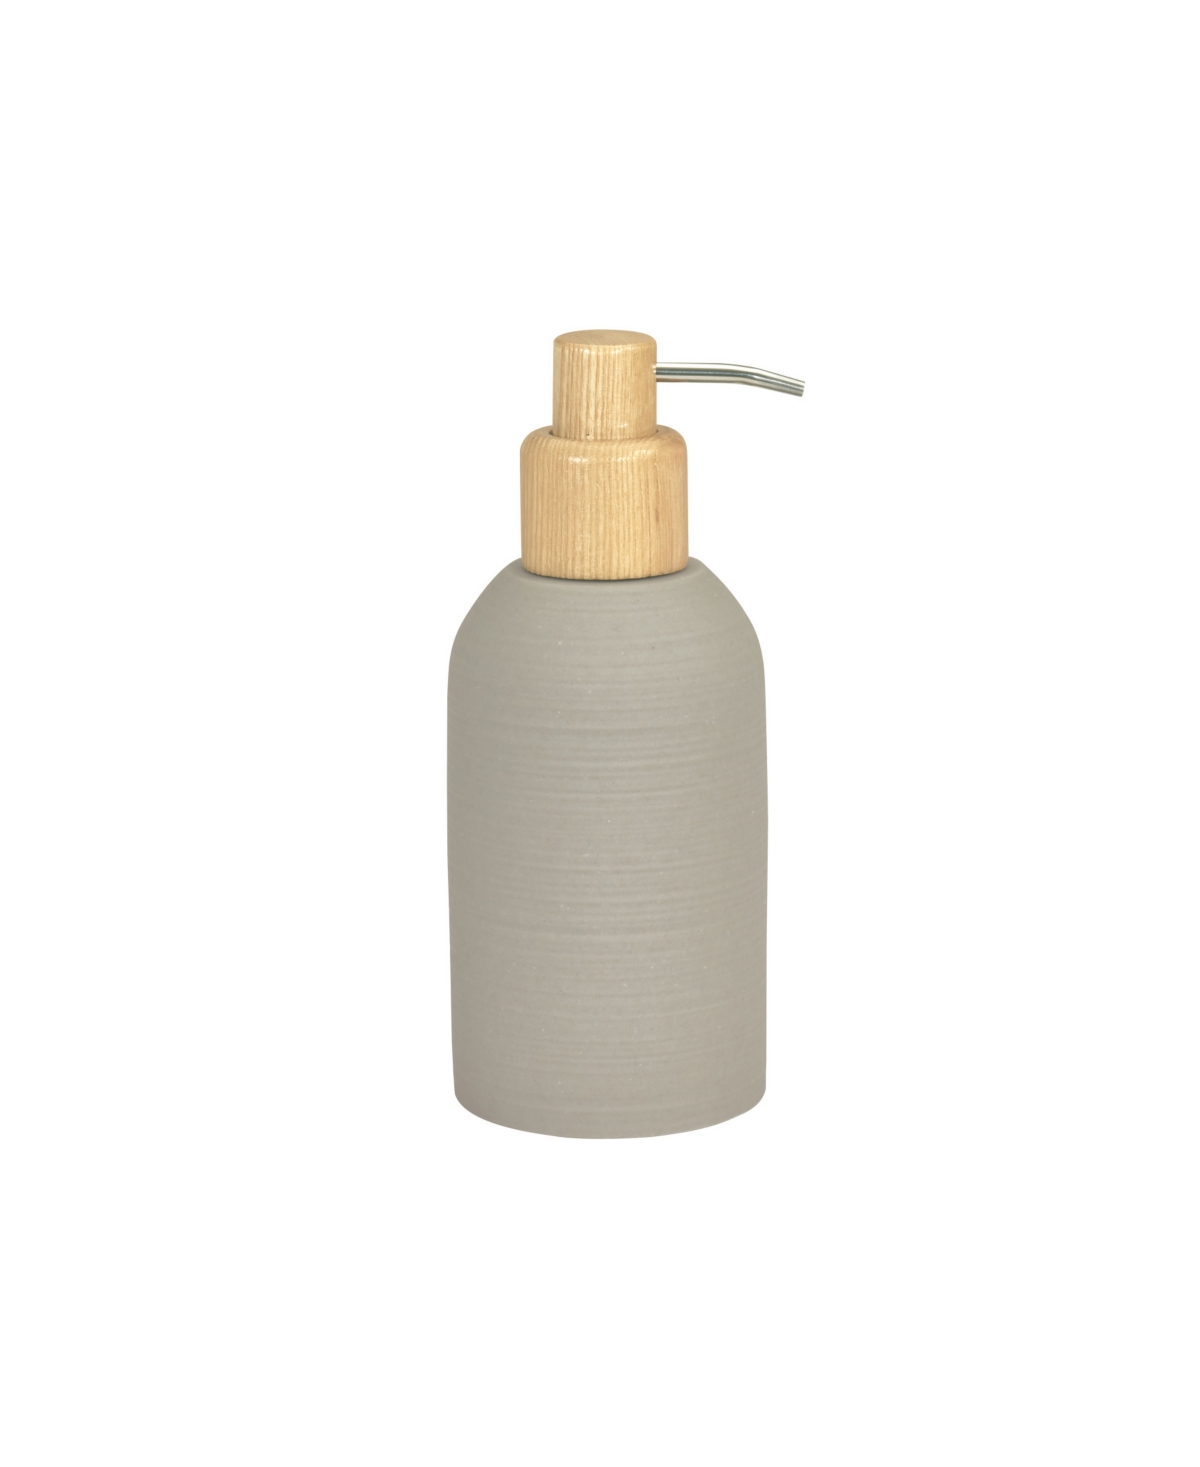 Oscar Oliver Colwell Lotion Dispenser Bedding In Gray